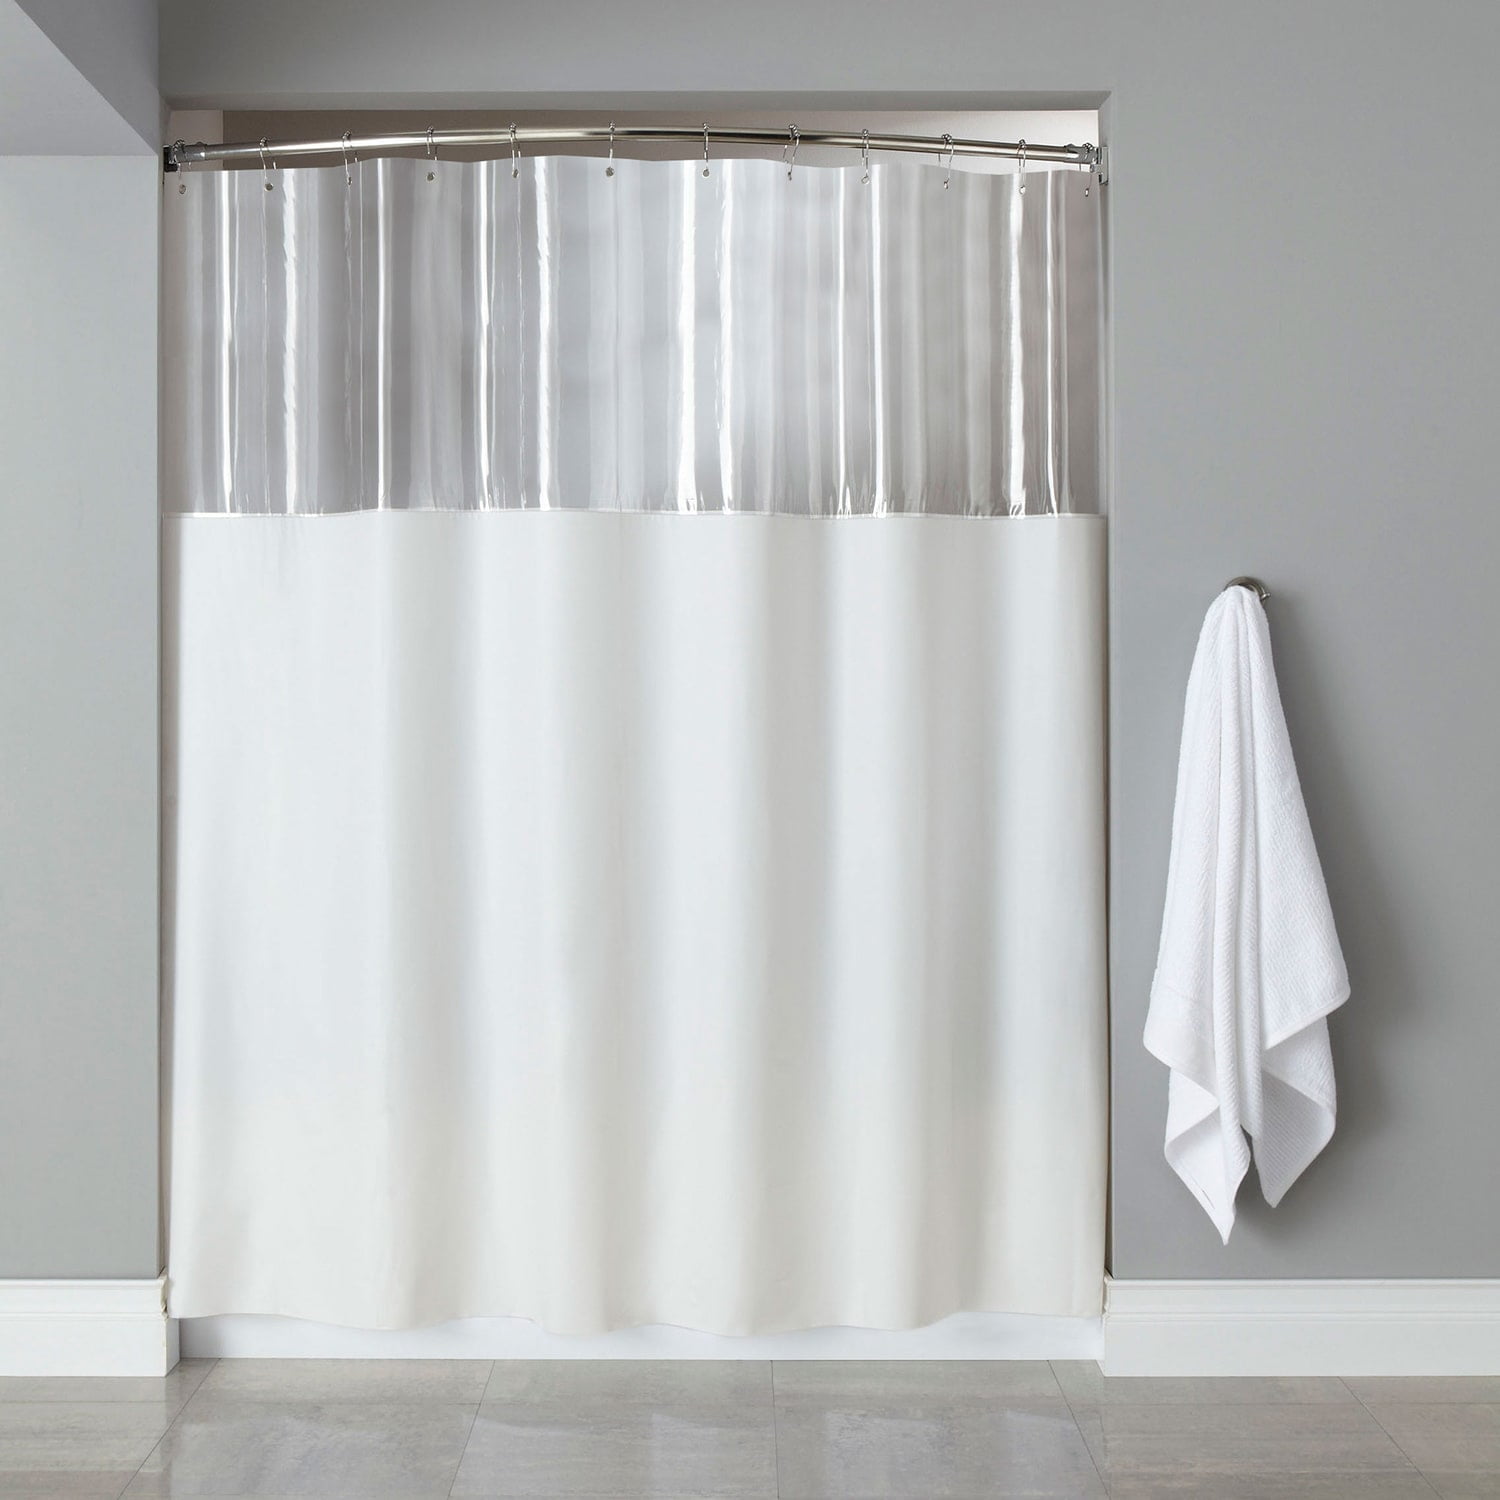 Sleep Safe Mold Proof Heavy Duty White Shower Curtain Mildew Bacteria Resistant 